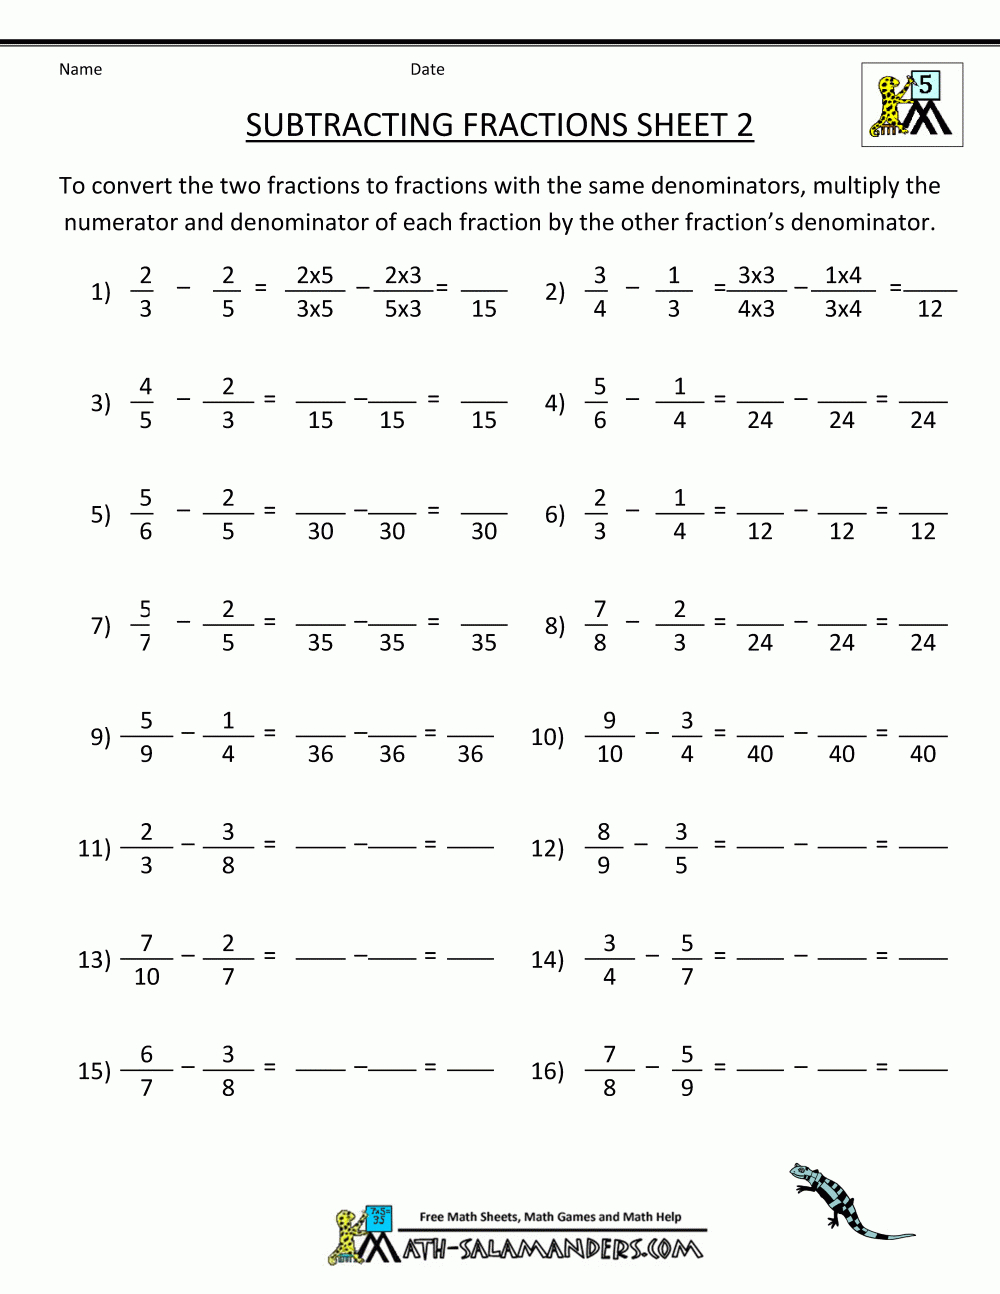 Free Printable Fraction Worksheets Subtracting Fractions 2 | Math - Free Printable Fraction Worksheets